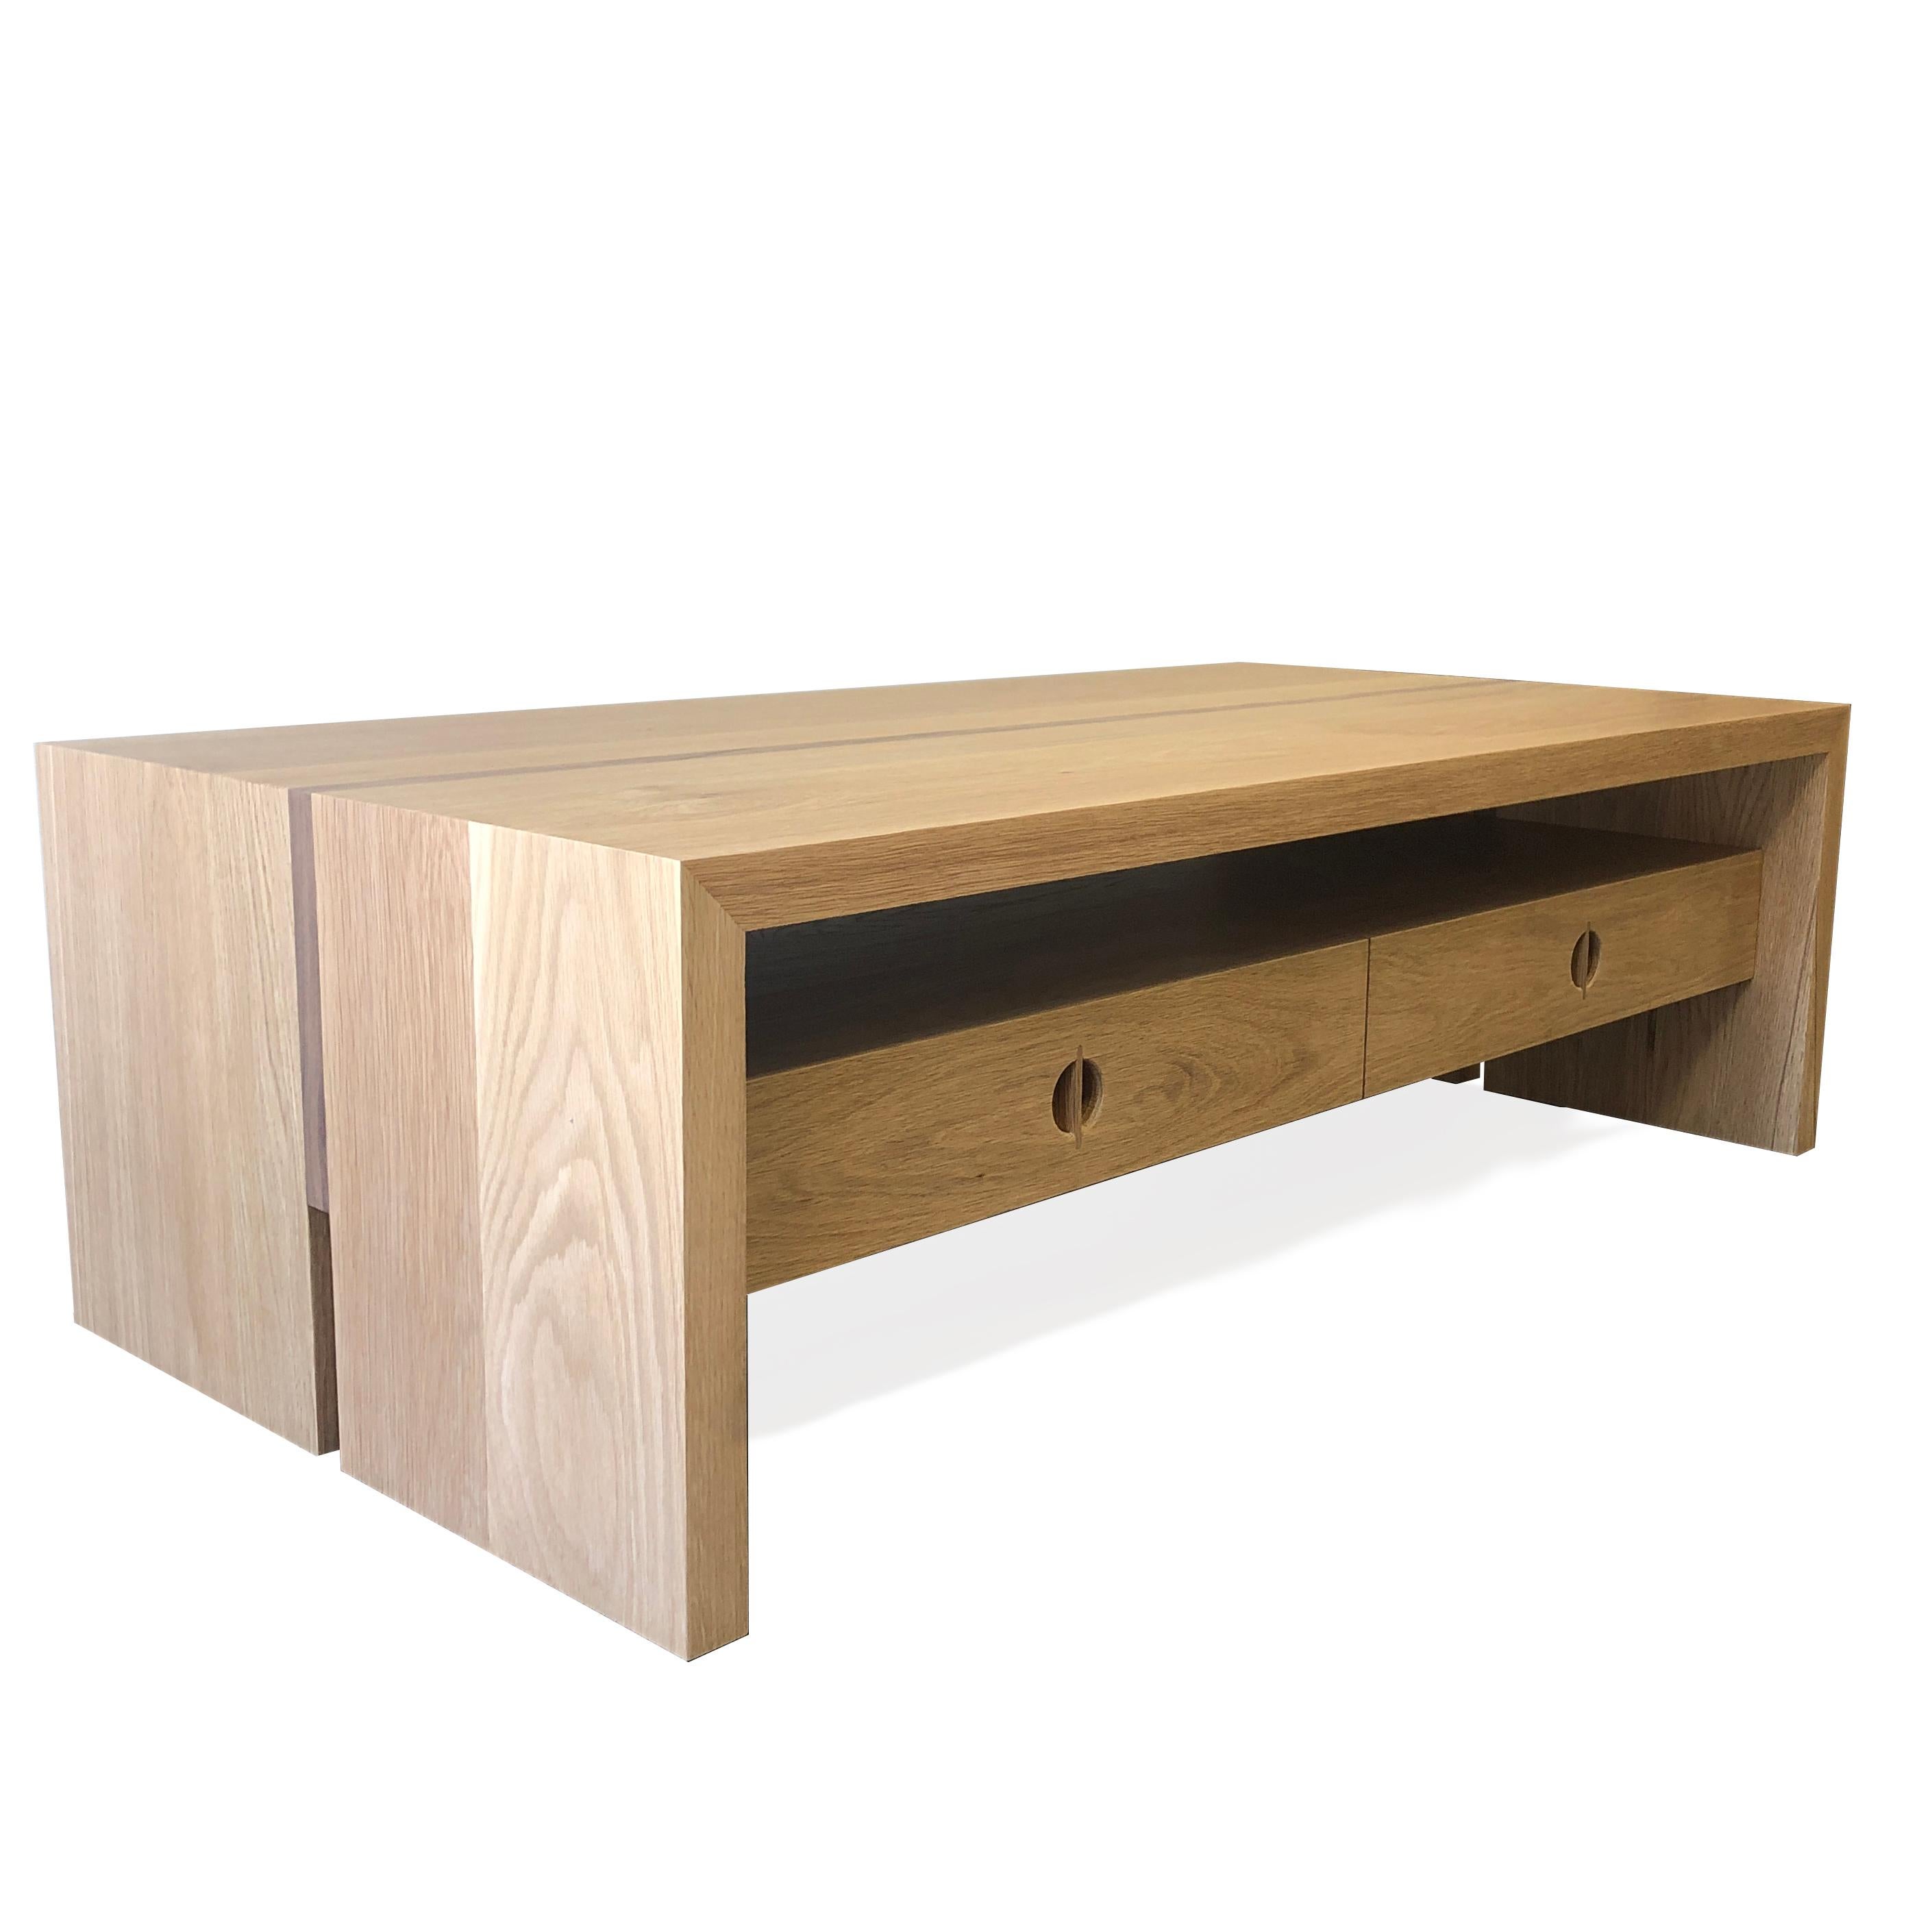 This custom coffee table is hand-made in the United States with all hardwood construction. It features a modern square design with a solid white oak body and a minimalist walnut inlay detail. Convenient and accessible storage drawers feature